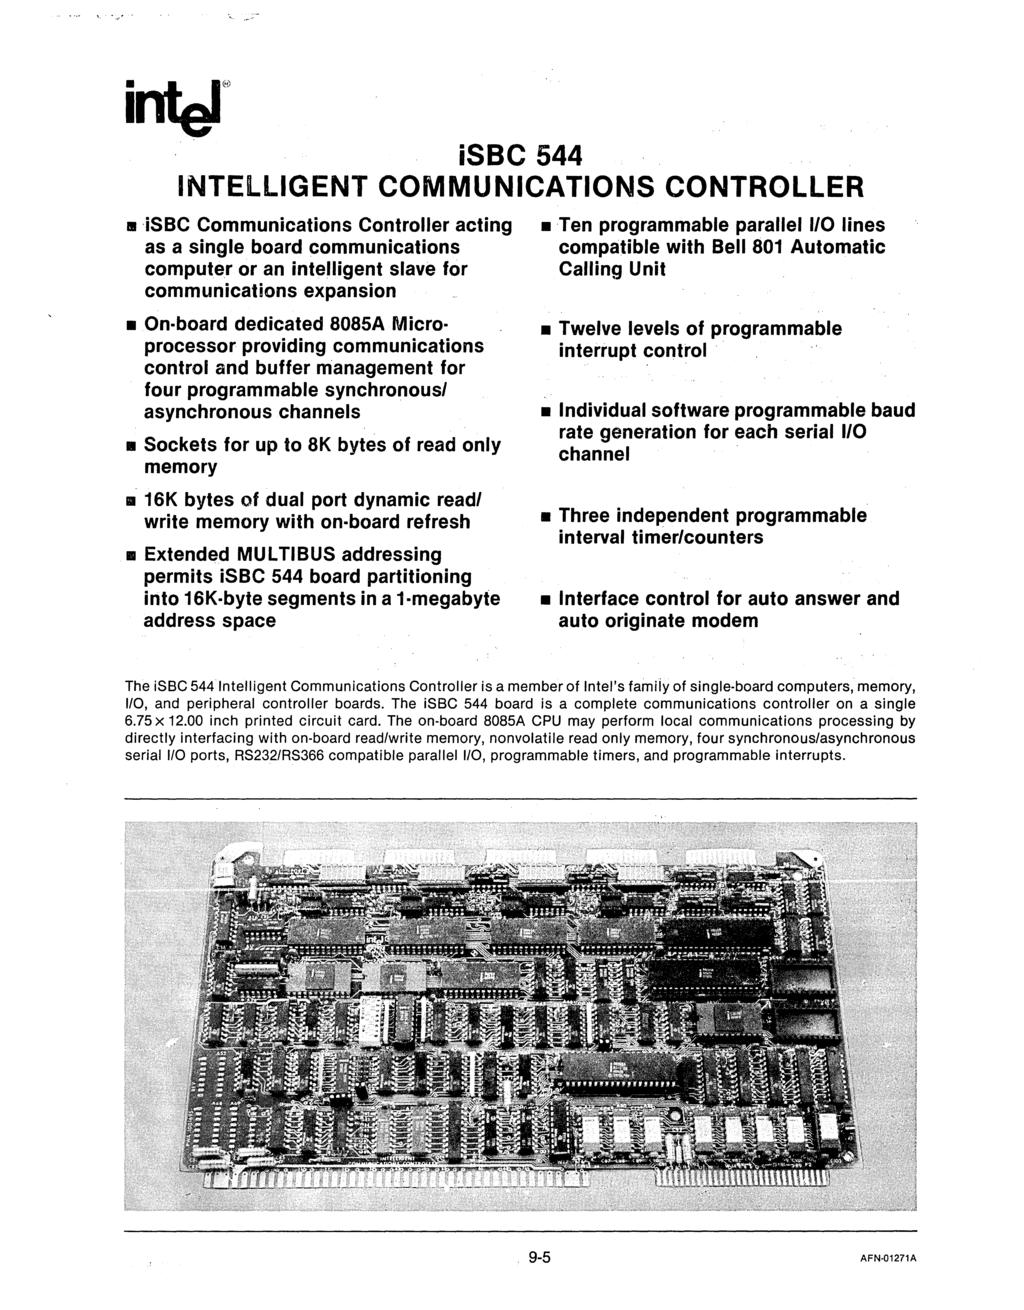 NTELLGENT COMMUNCATONS CONTROLLER lisbc Communications Controller acting as a single board communications computer or an intelligent slave for communications expansion On-board dedicated 8085A